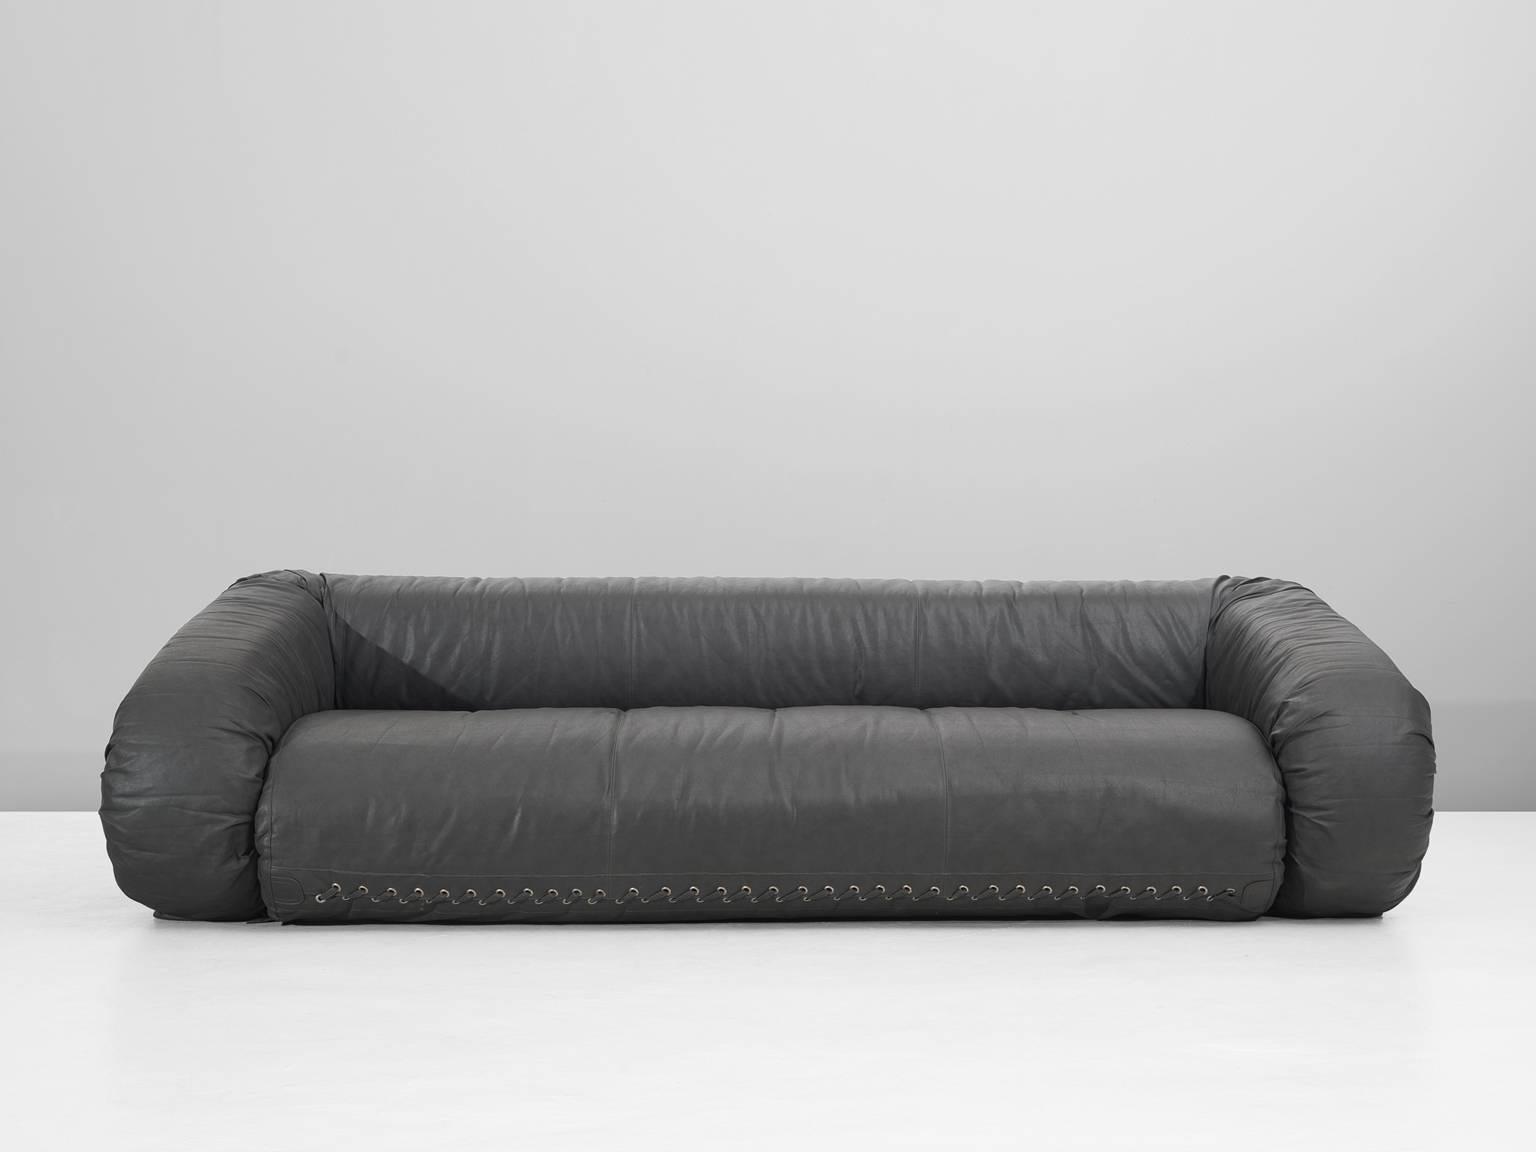 'Anfibio' sofa, in leather, by Alessandro Becchi for Giovannetti, Italy, 1970.

Convertible sofa in grey leather upholstery by Italian designer Alessandro Becchi. This sofa is multifunctional. It is a highly comfortable sofa with a beautiful